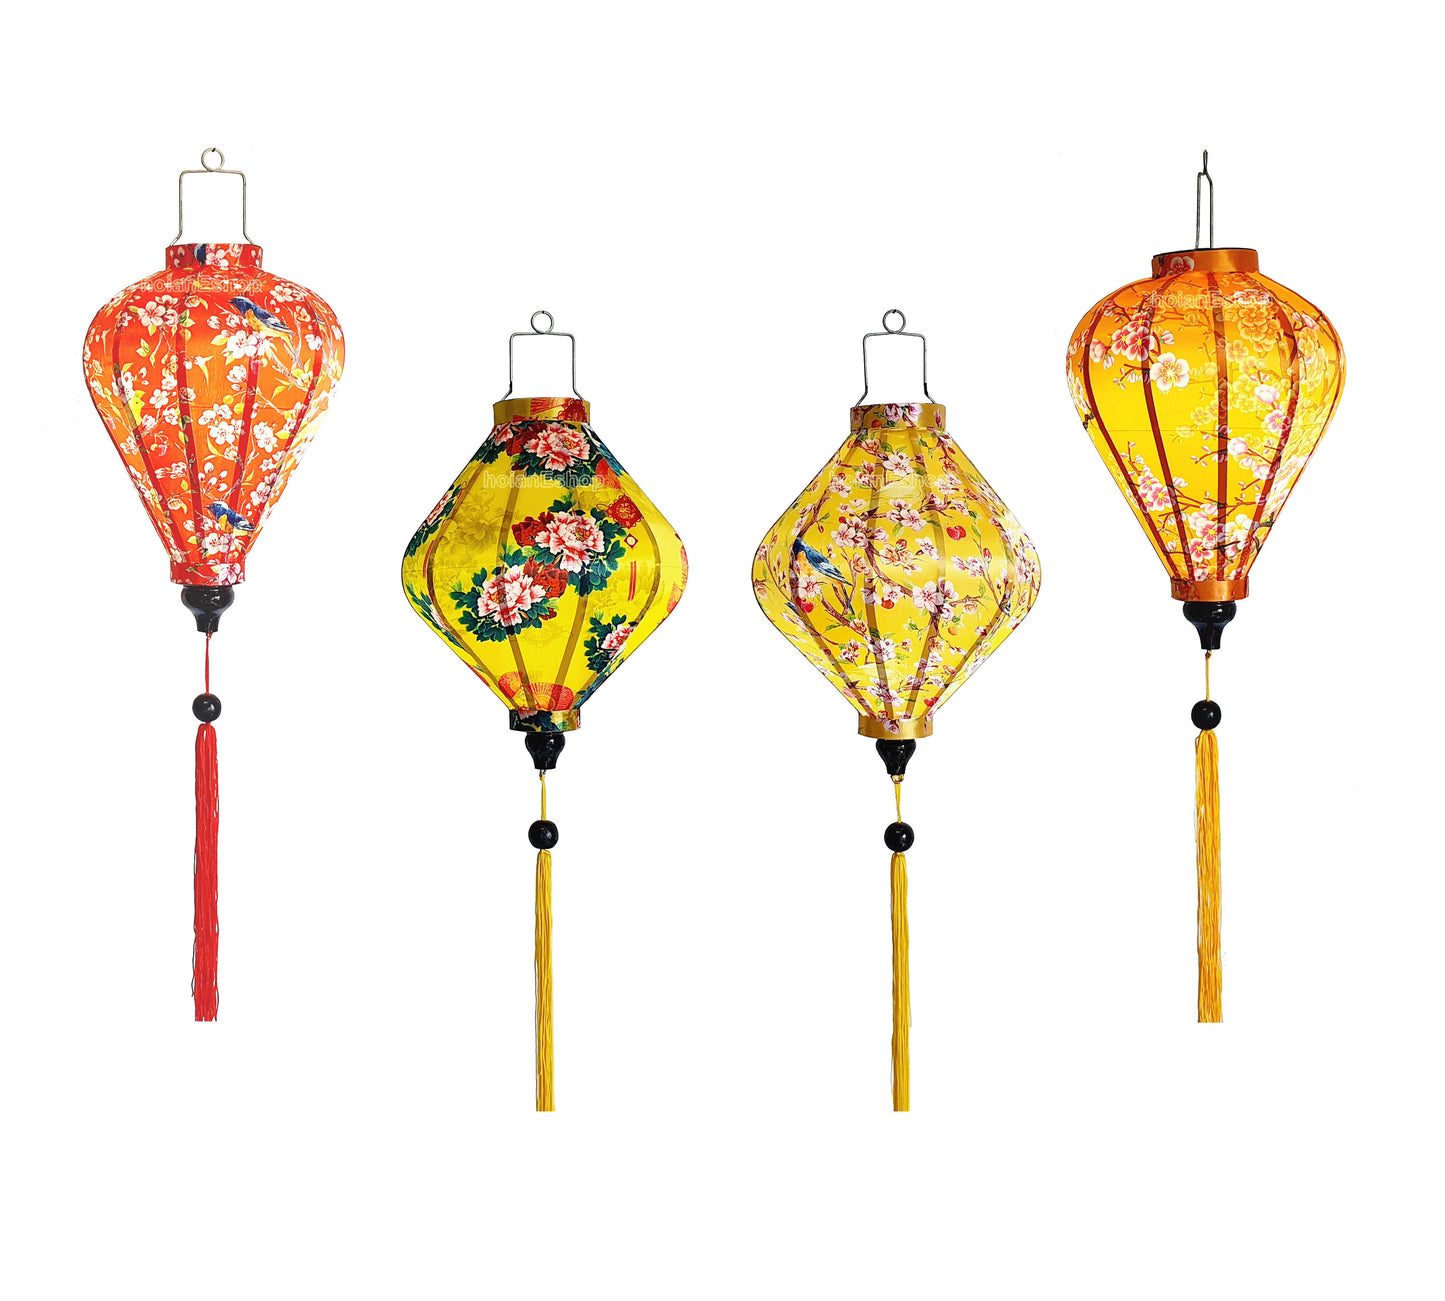 4 Vietnamese Hoi An Silk Lanterns with Apricot flowers fabric - Cherry blossom fabric - New Year Decorations - TET Decorations